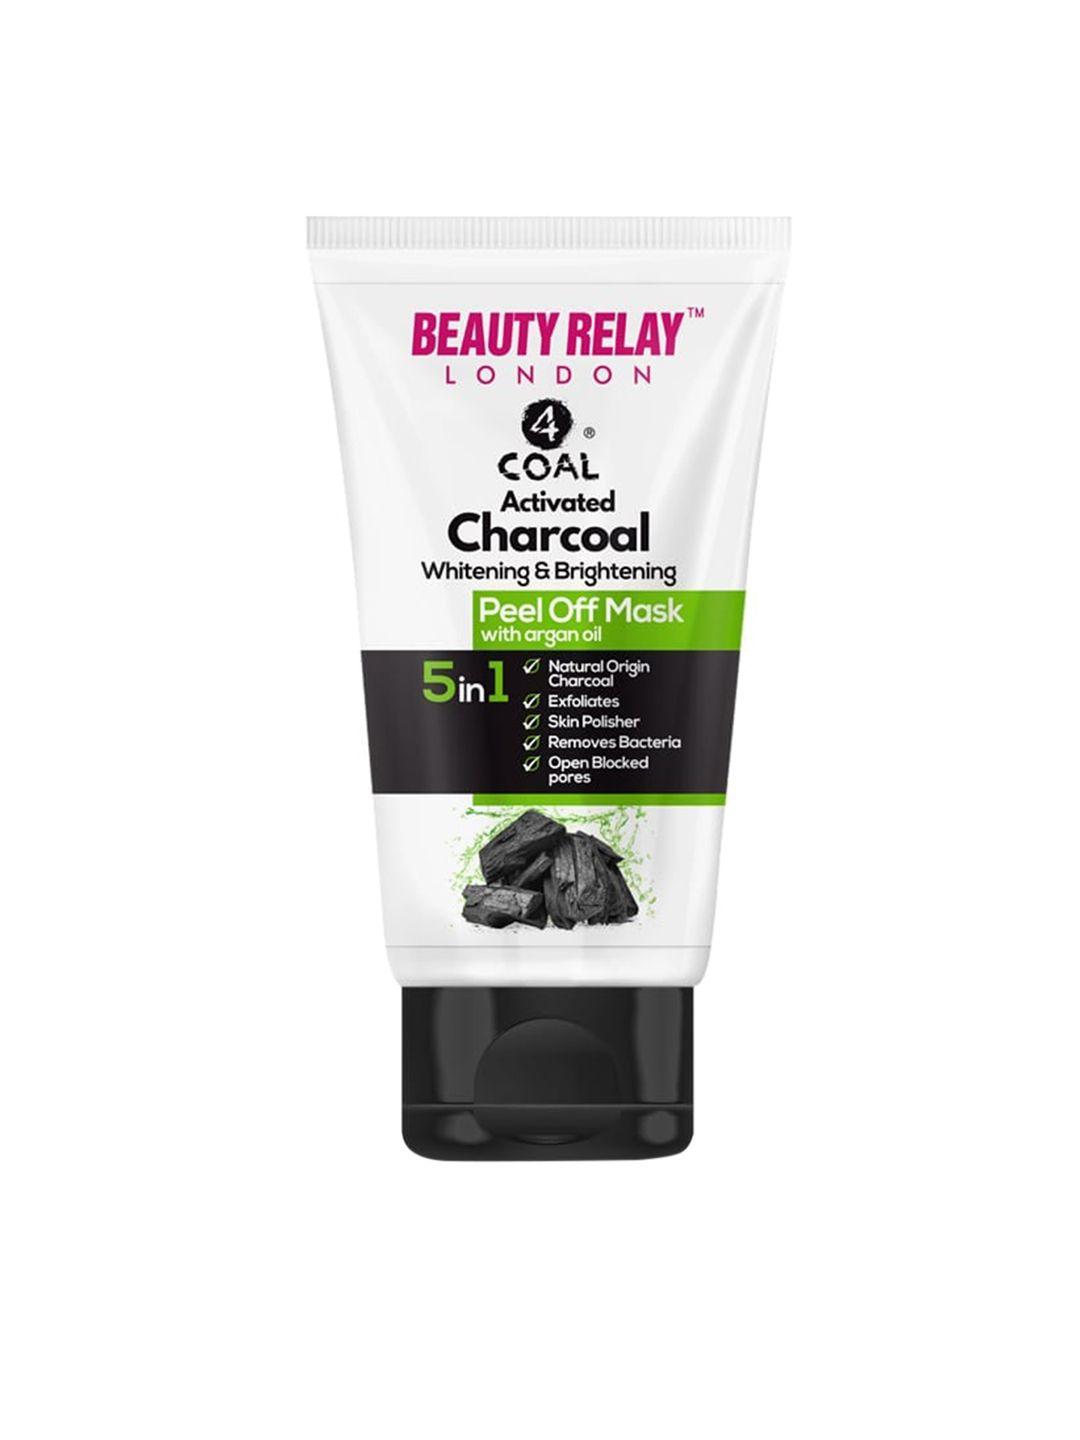 beautyrelay london black activated charcoal whitening & brightening peel off mask